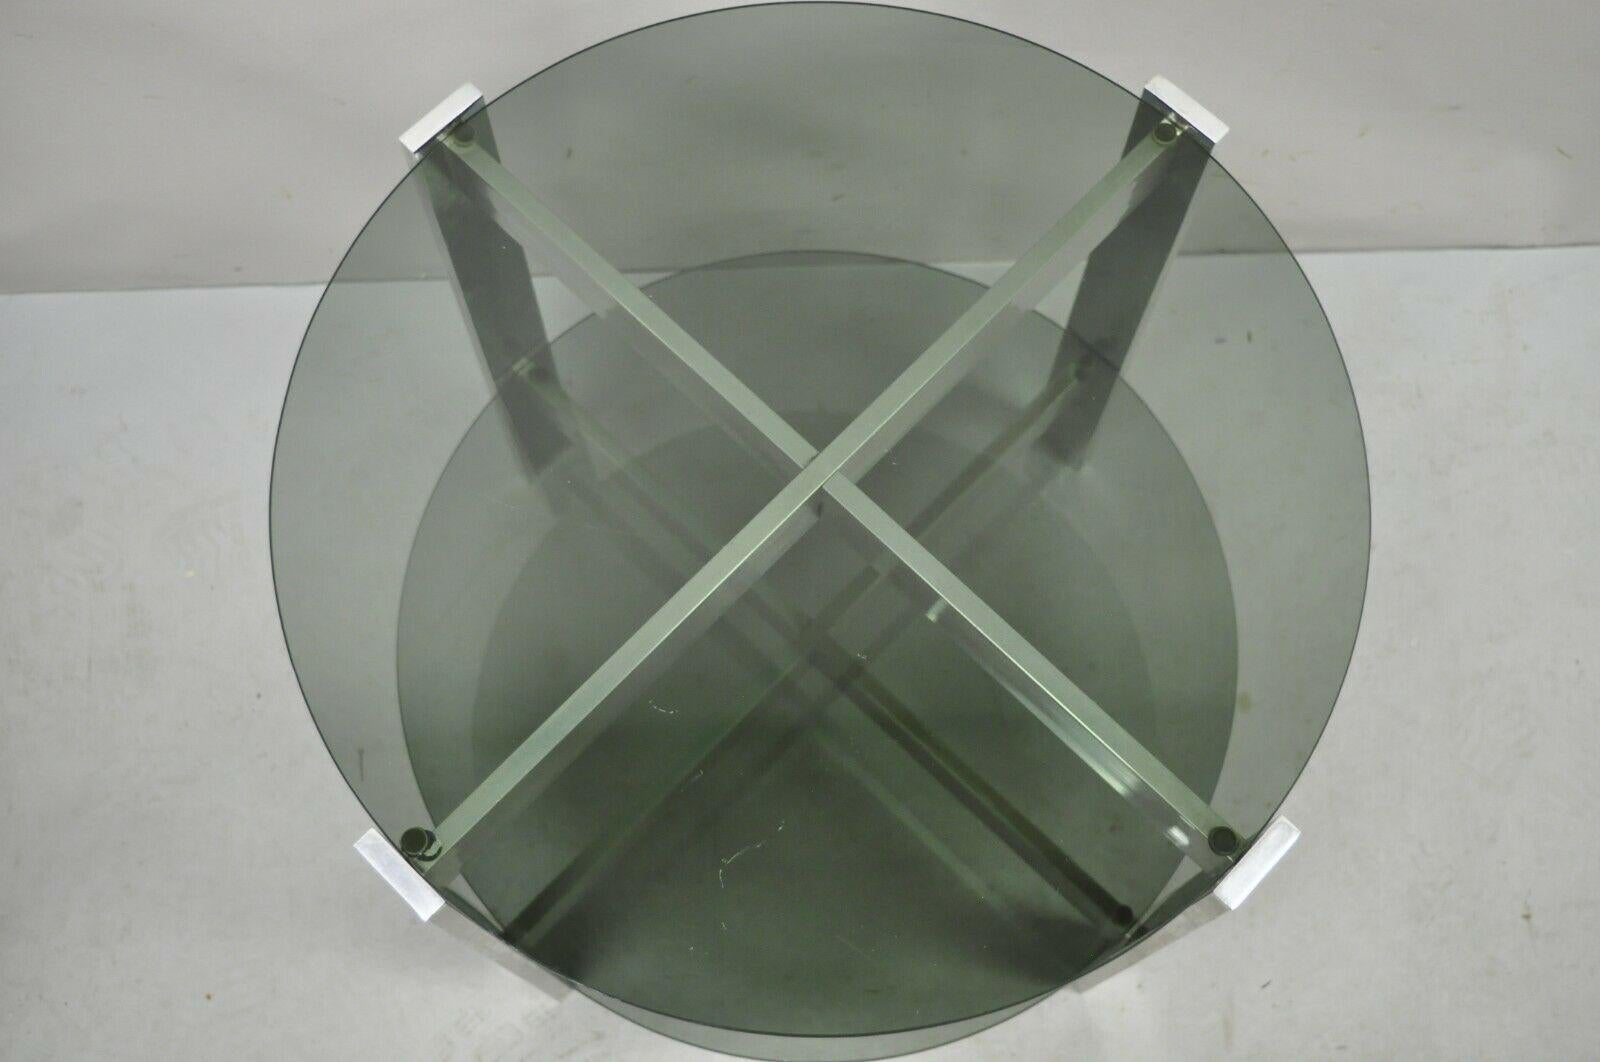 Vintage Mid-Century Modern round smoked glass 2 tier aluminum base side table. Item features (2) round smoked glass tops, cast aluminum x-form frame, clean modernist, quality craftsmanship, great style and form. Circa 1970. Measurements: 20